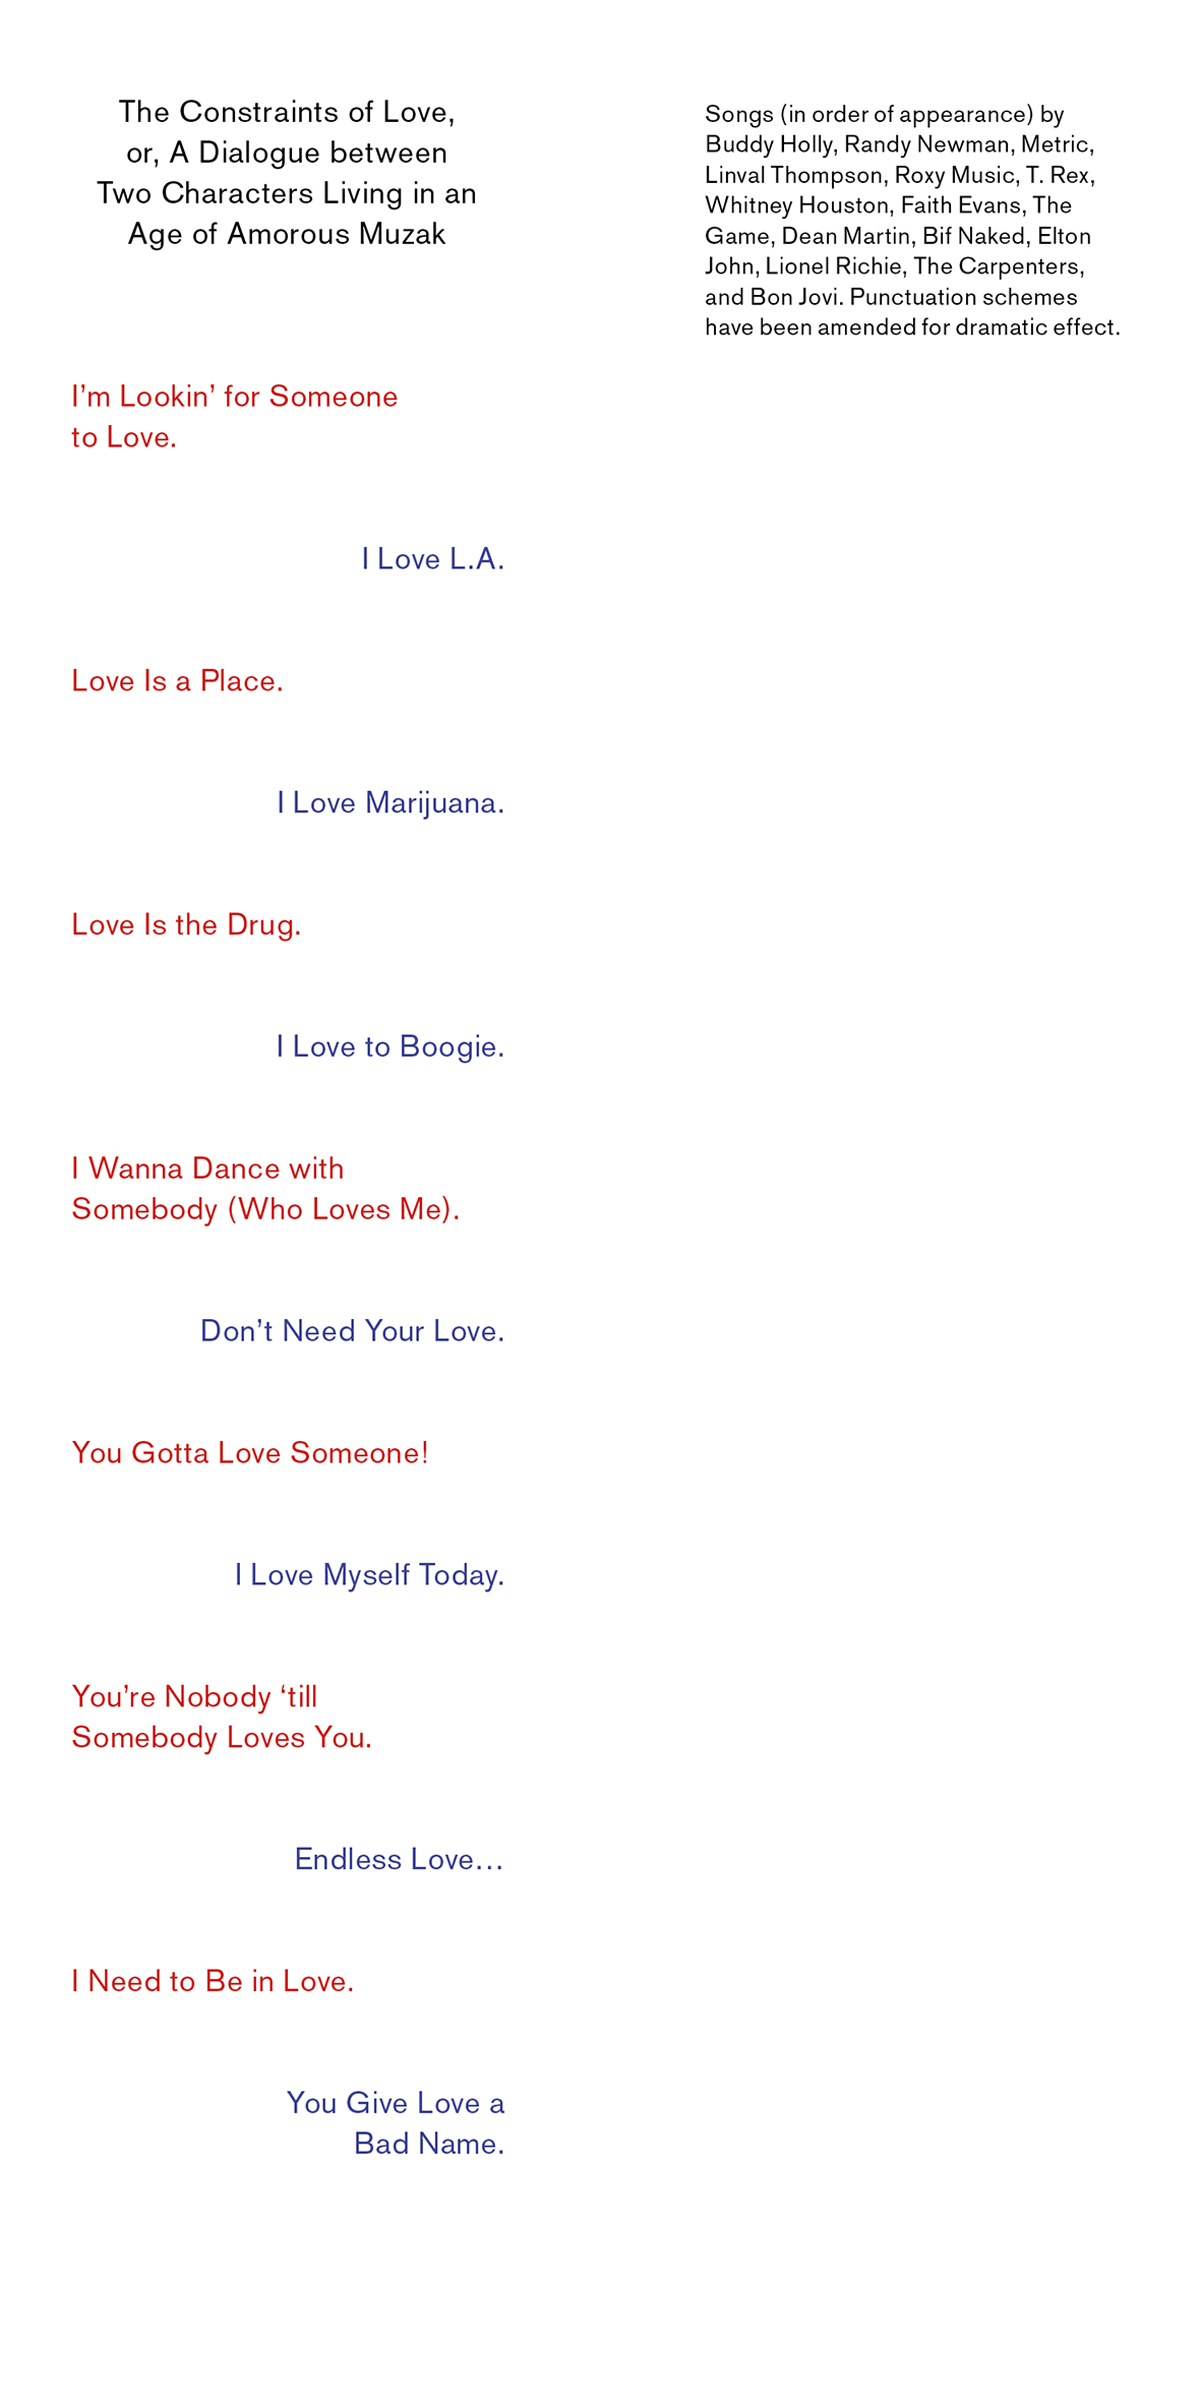 A bookmark which displays a script for two people, a dialogue entirely composed of love song titles such as “I Love L.A.” and You Gotta Love Someone!” The back of the bookmark lists the artists responsible for the song titles, including Buddy Holly, Roxy Music, and Elton John to name a few.